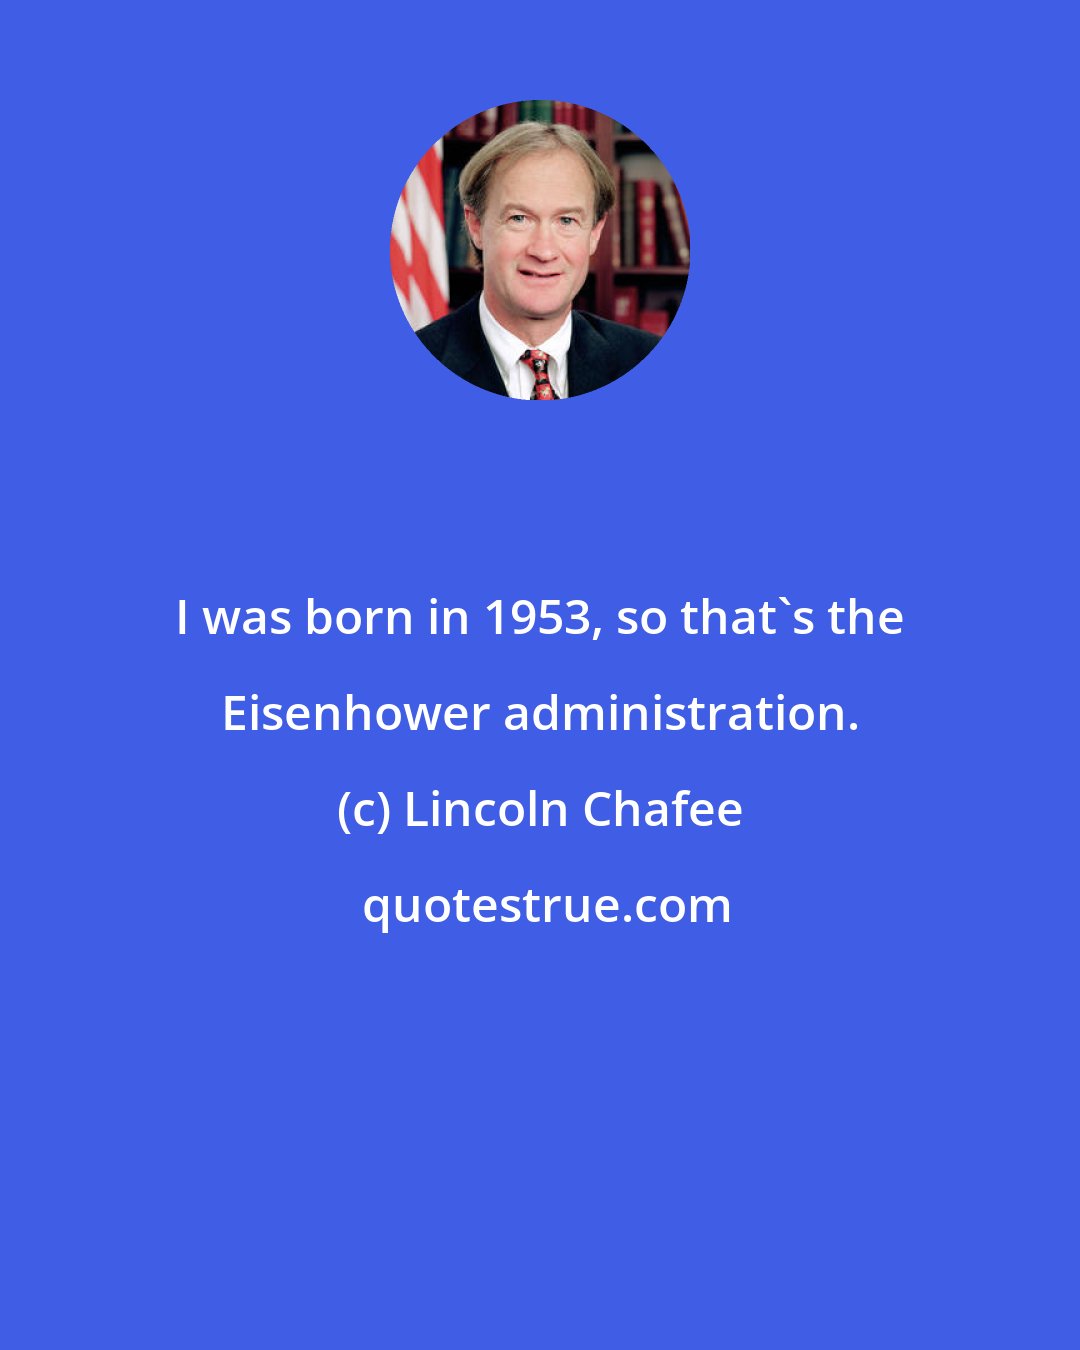 Lincoln Chafee: I was born in 1953, so that's the Eisenhower administration.